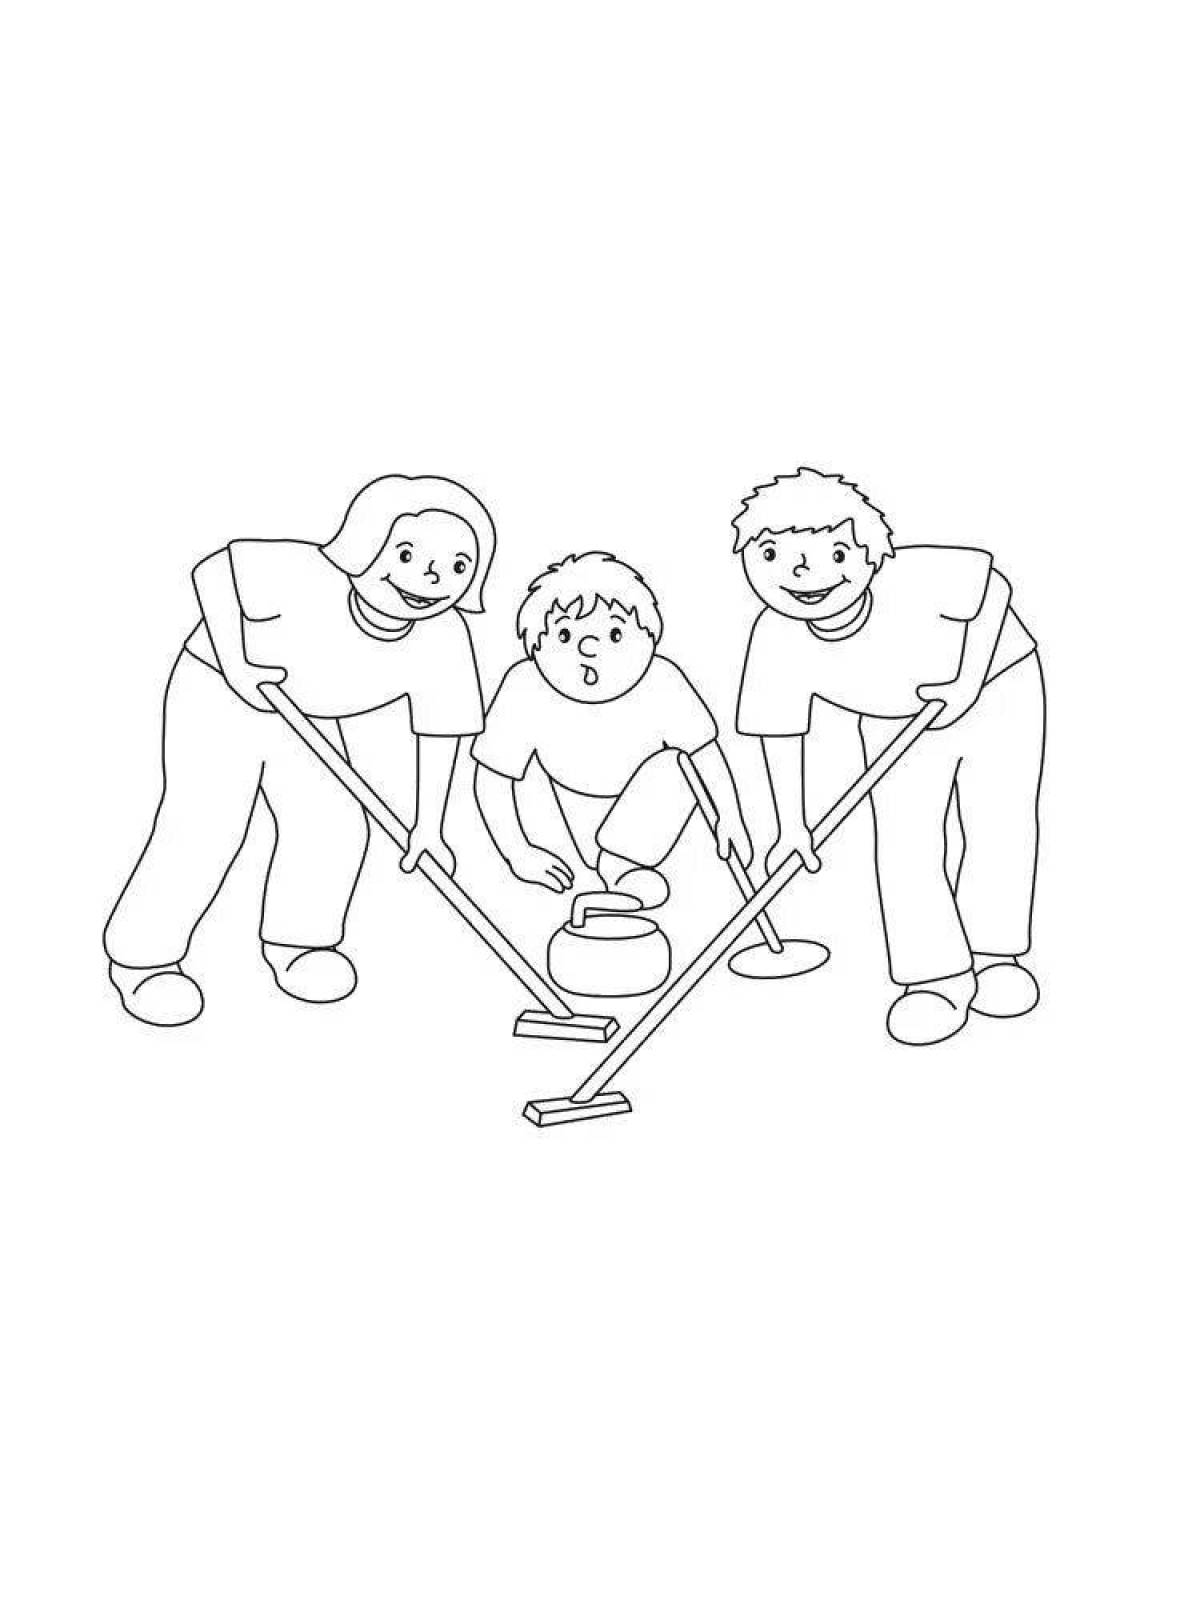 Coloring page hypnotic curling